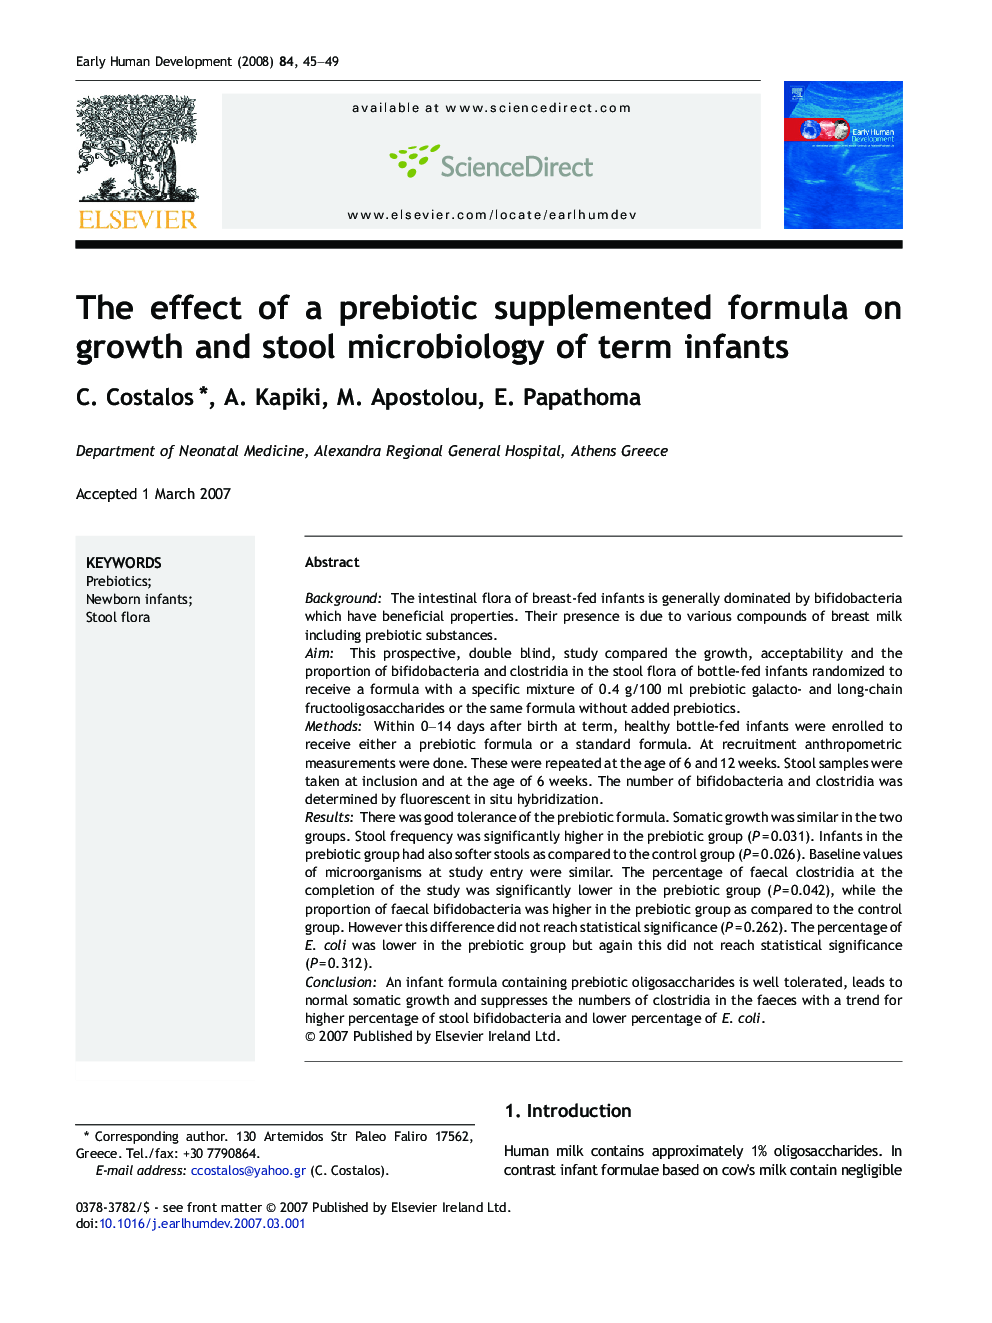 The effect of a prebiotic supplemented formula on growth and stool microbiology of term infants